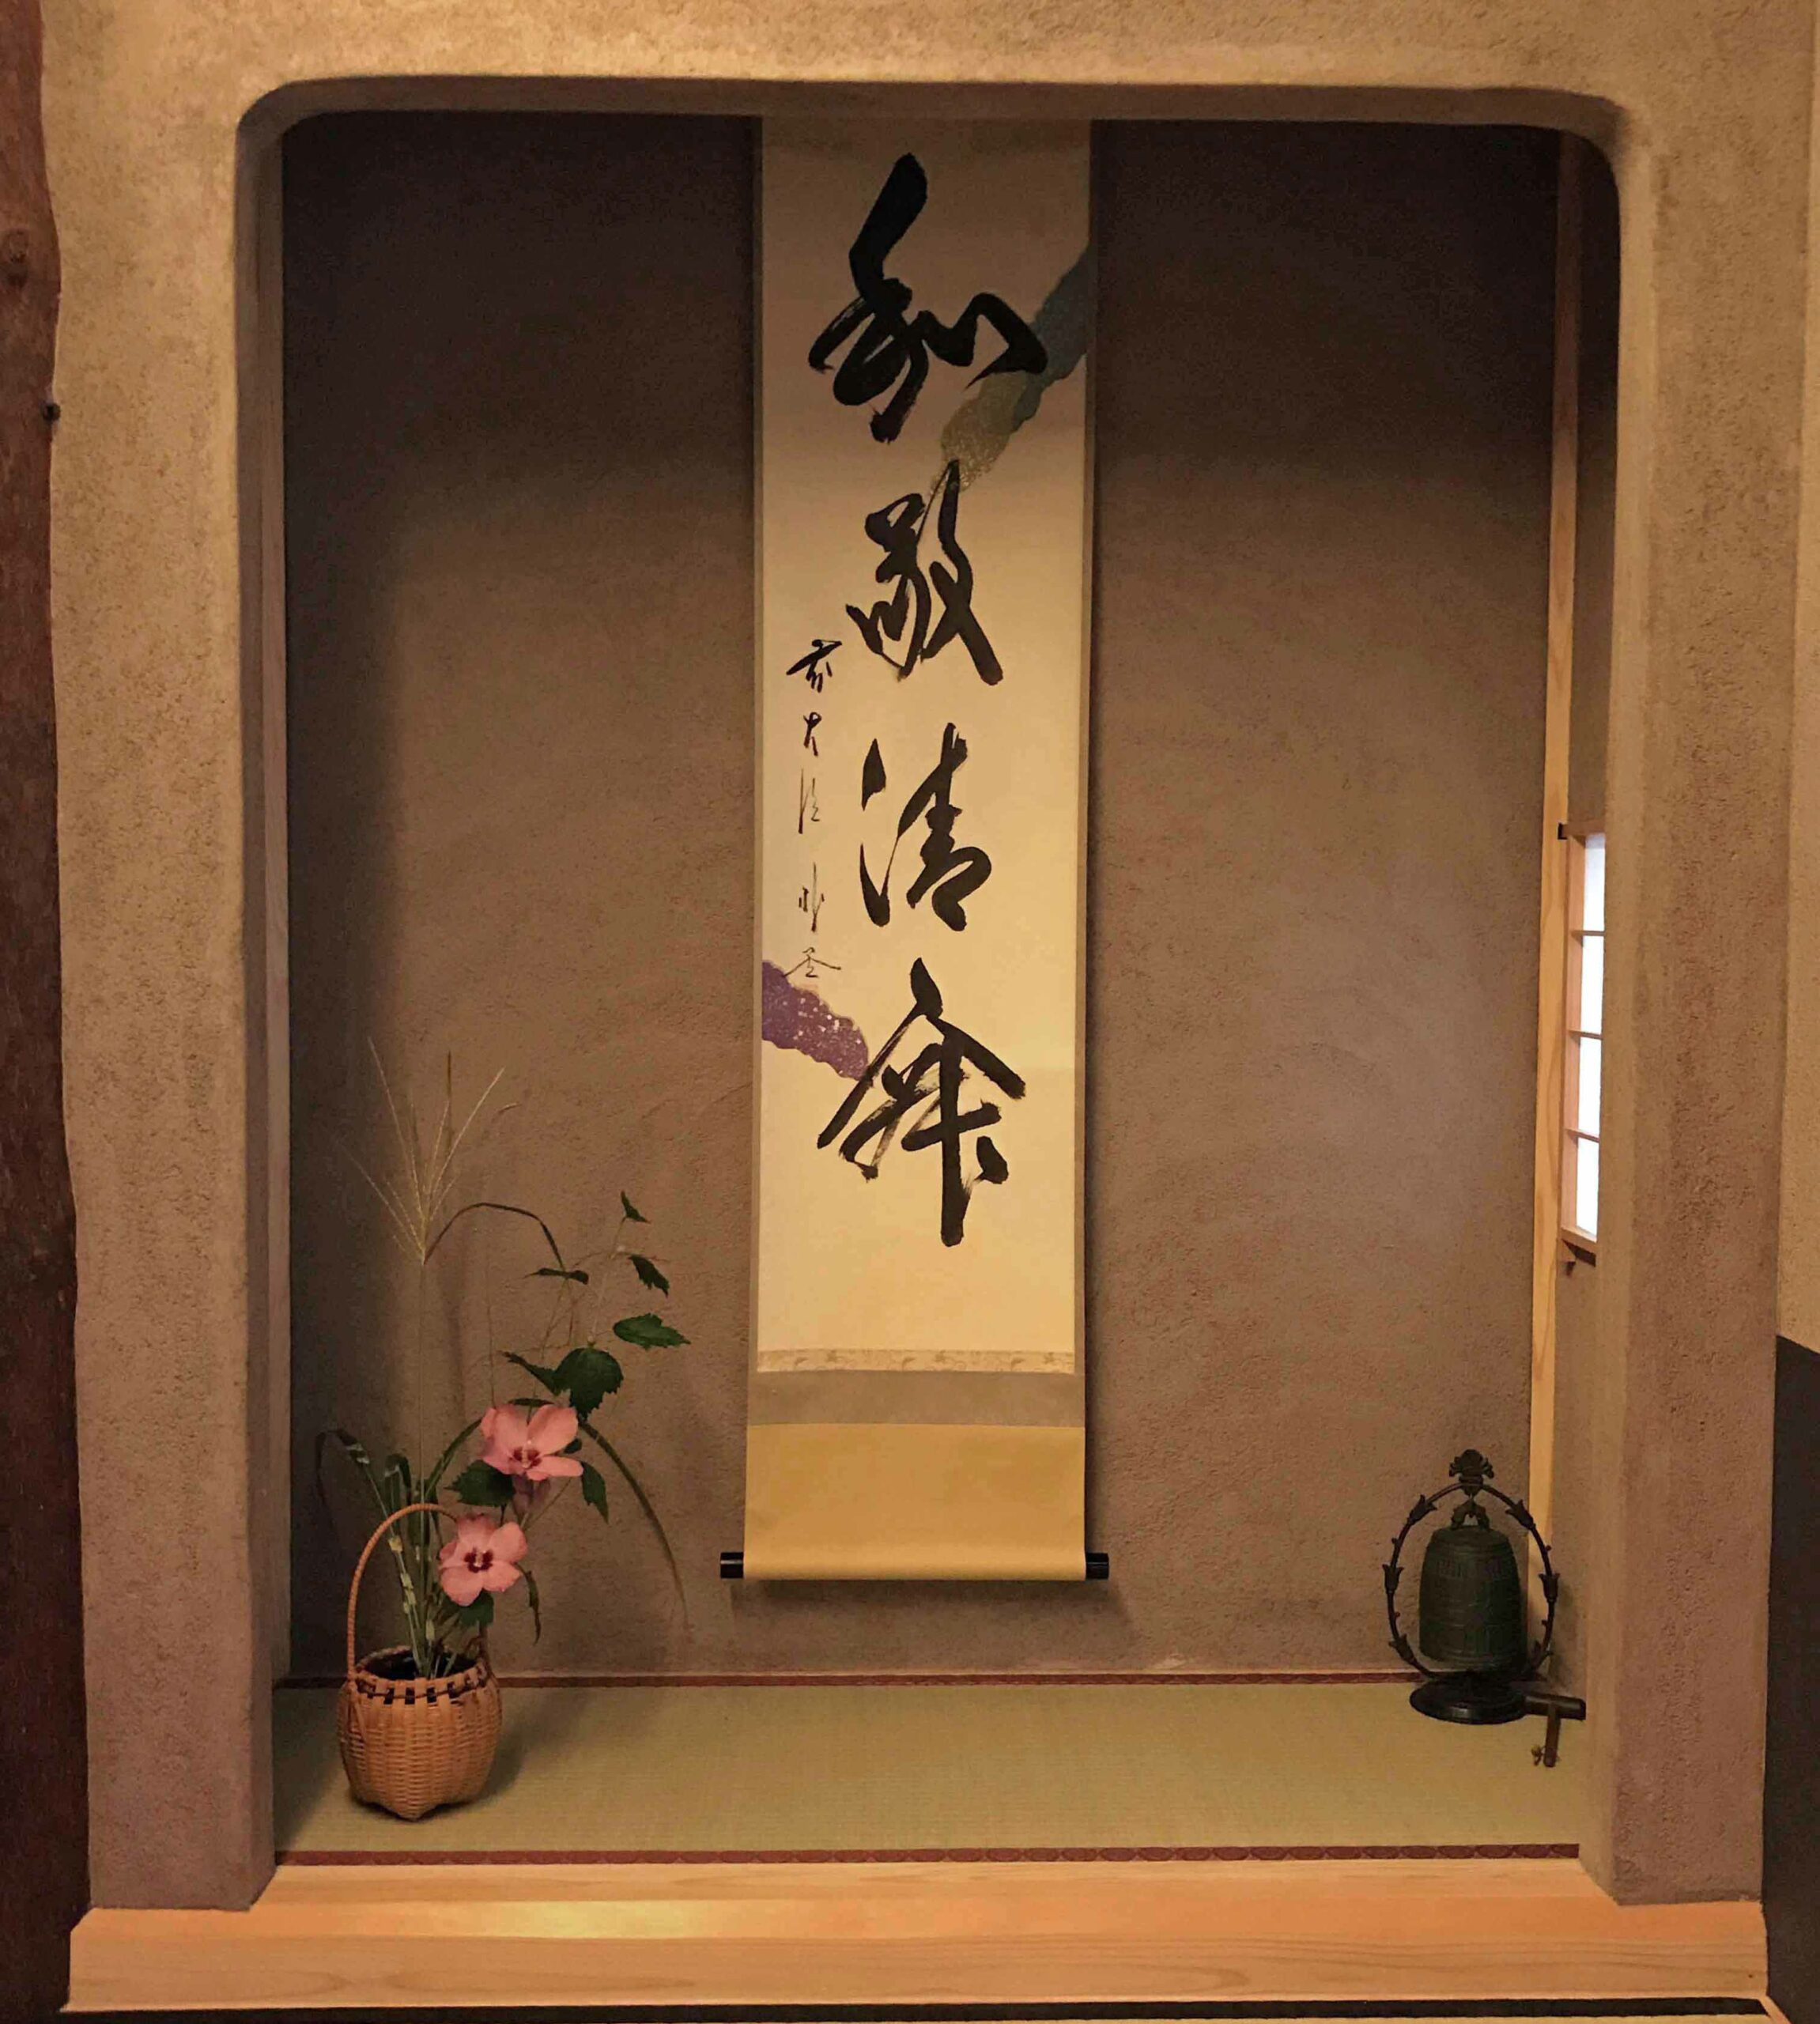 The scroll hung in the tokonoma